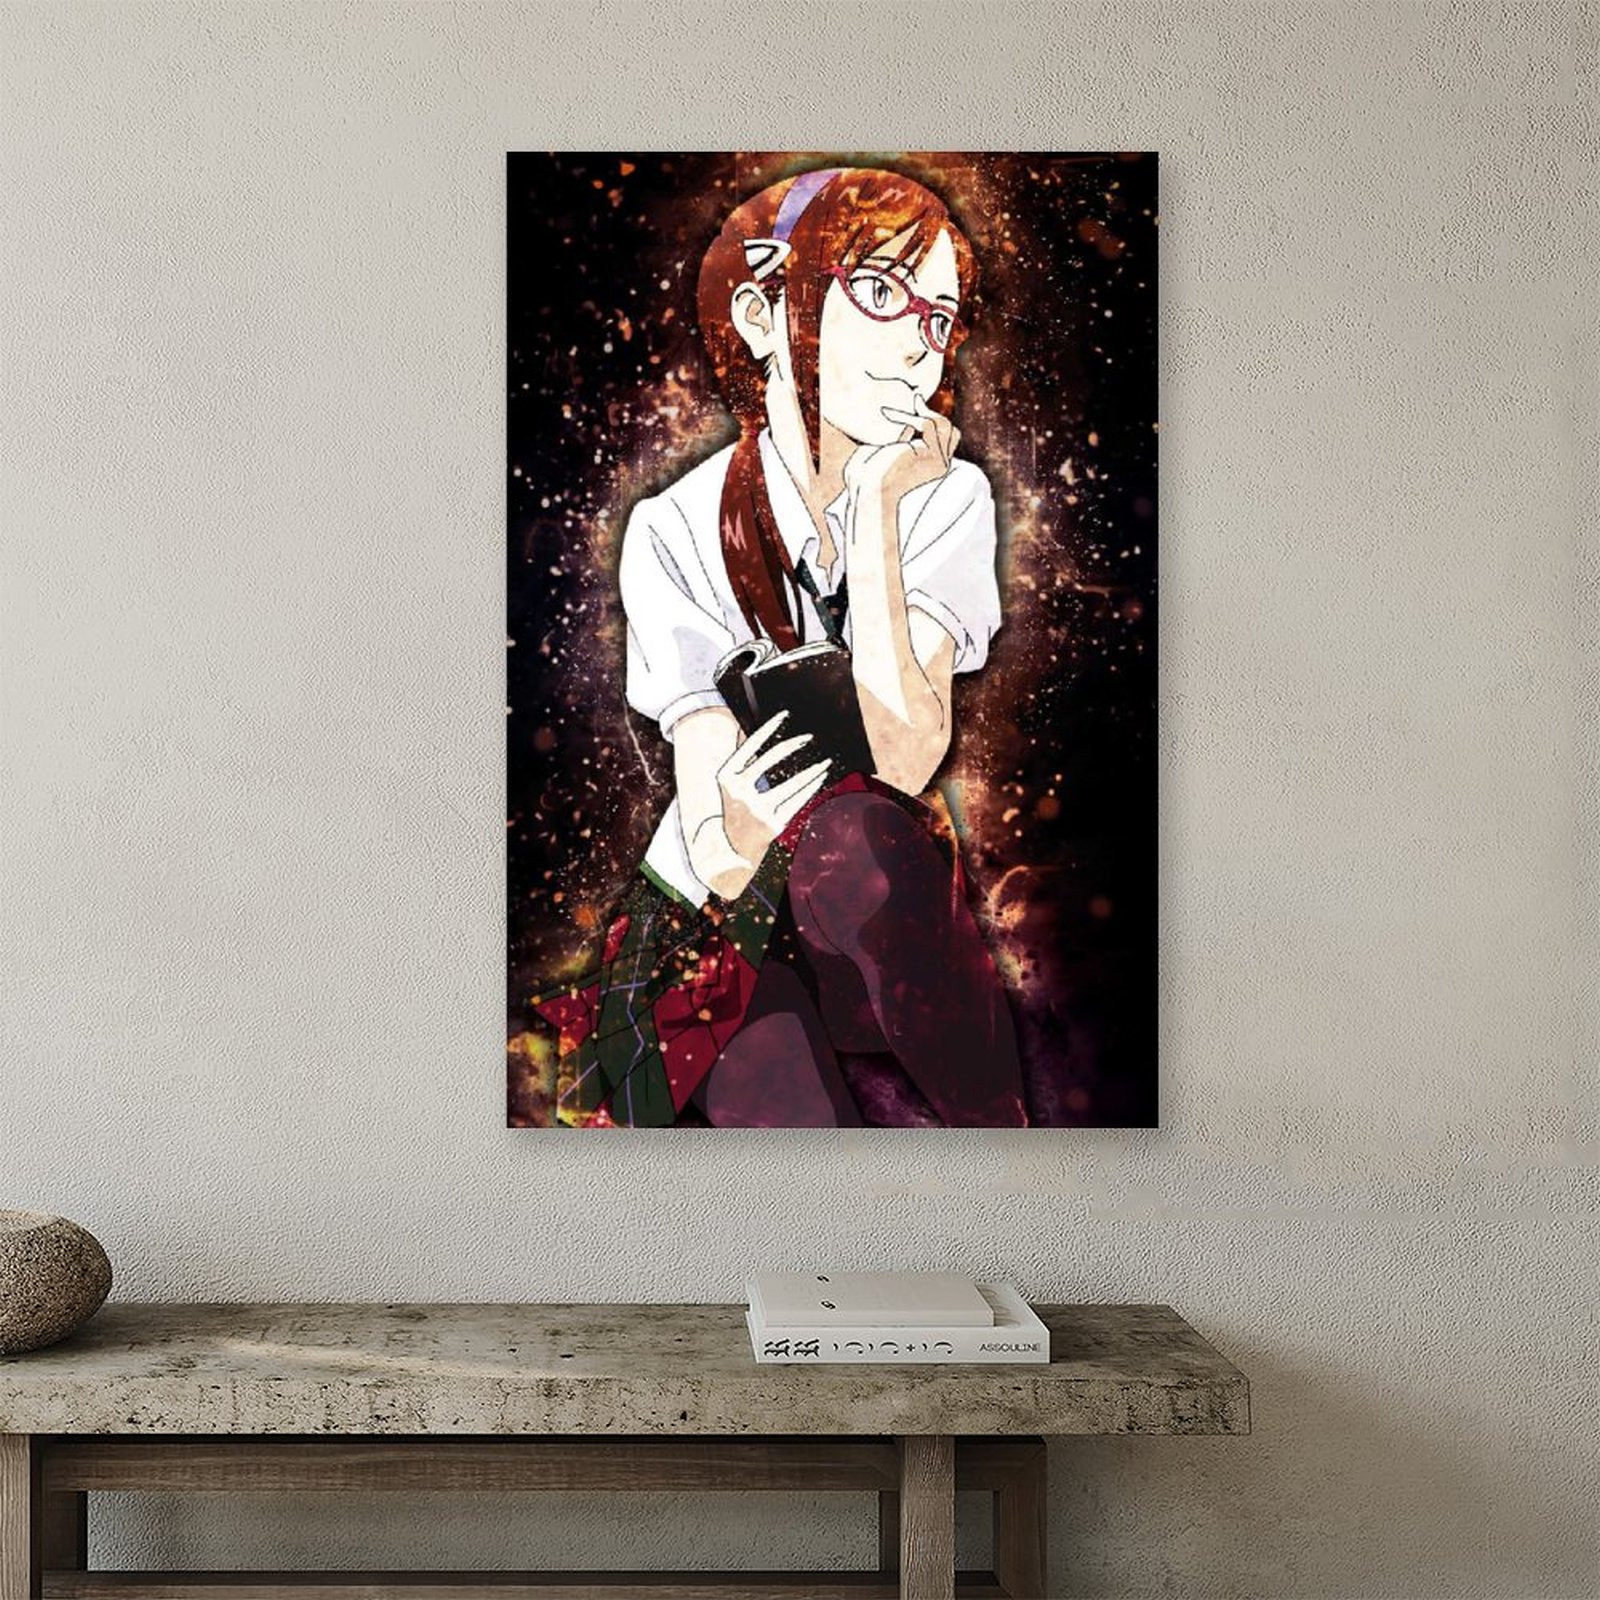 Anime Evangelion Makinami GirlCanvas Painting Wall Art Posters and Prints Wall Pictures for Living Room Decoration 3 - Evangelion Shop